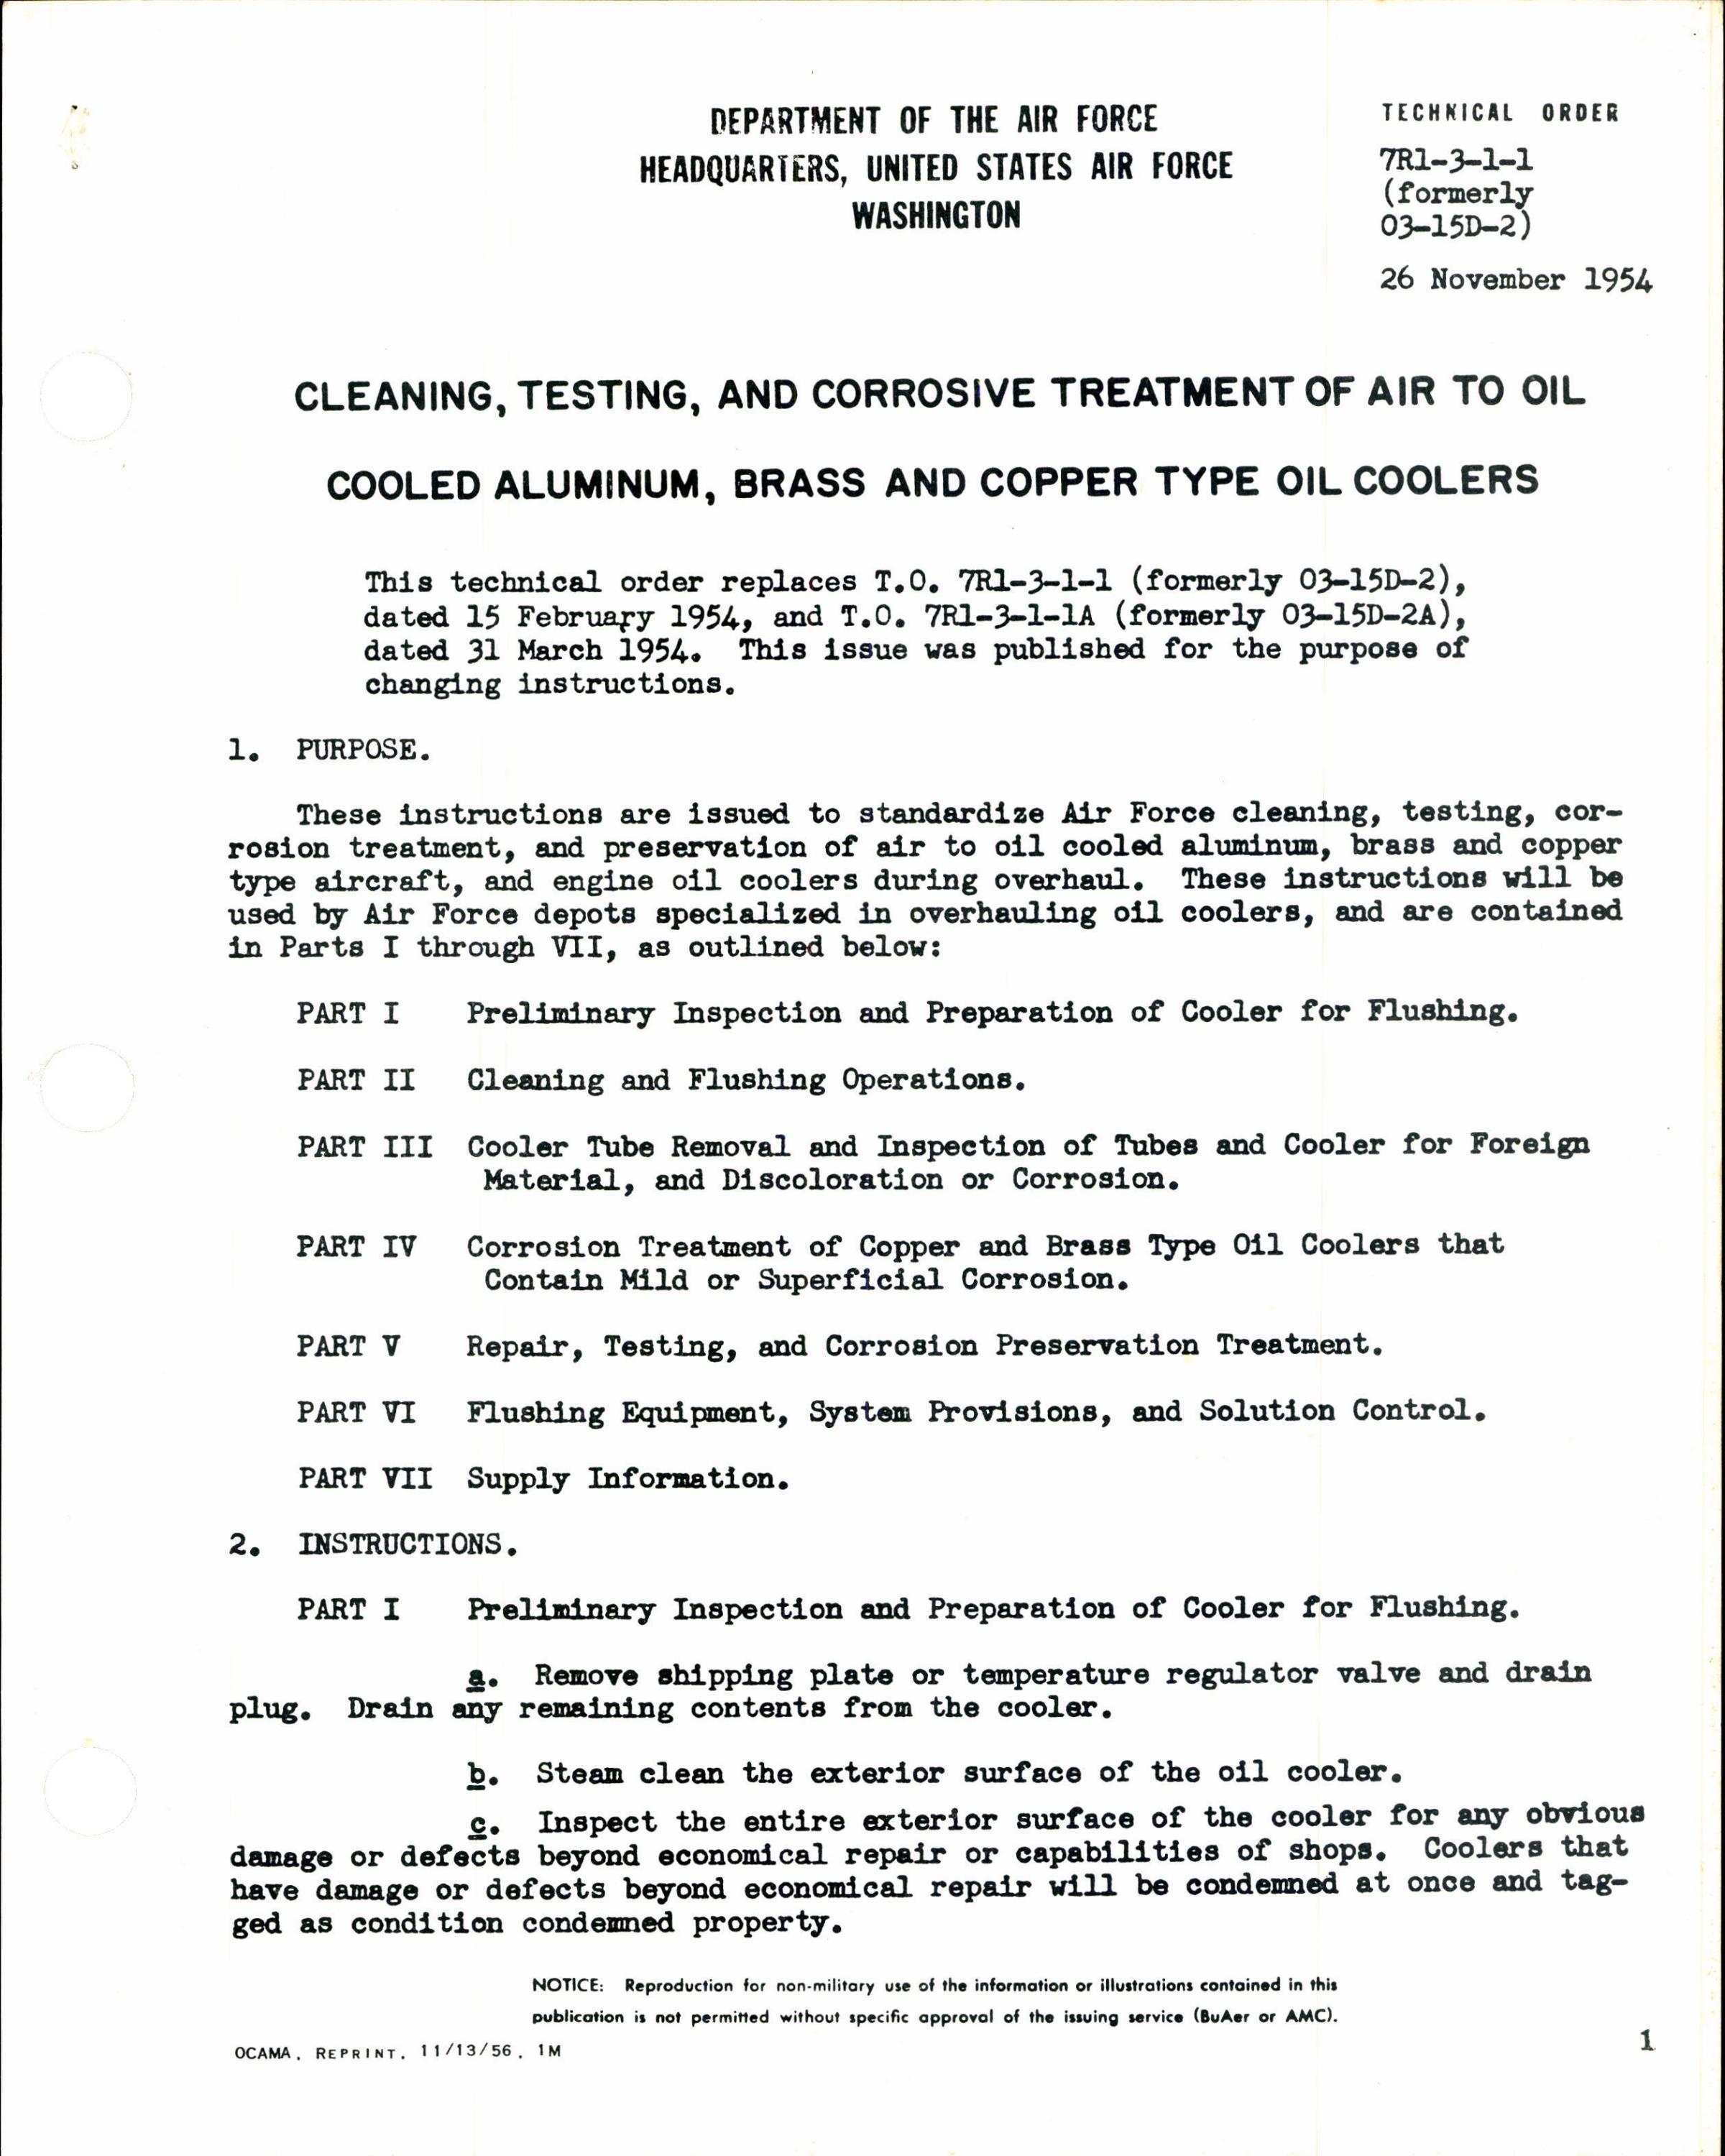 Sample page 1 from AirCorps Library document: Treatment of Air to Oil Cooled Aluminum, Brass & Copper